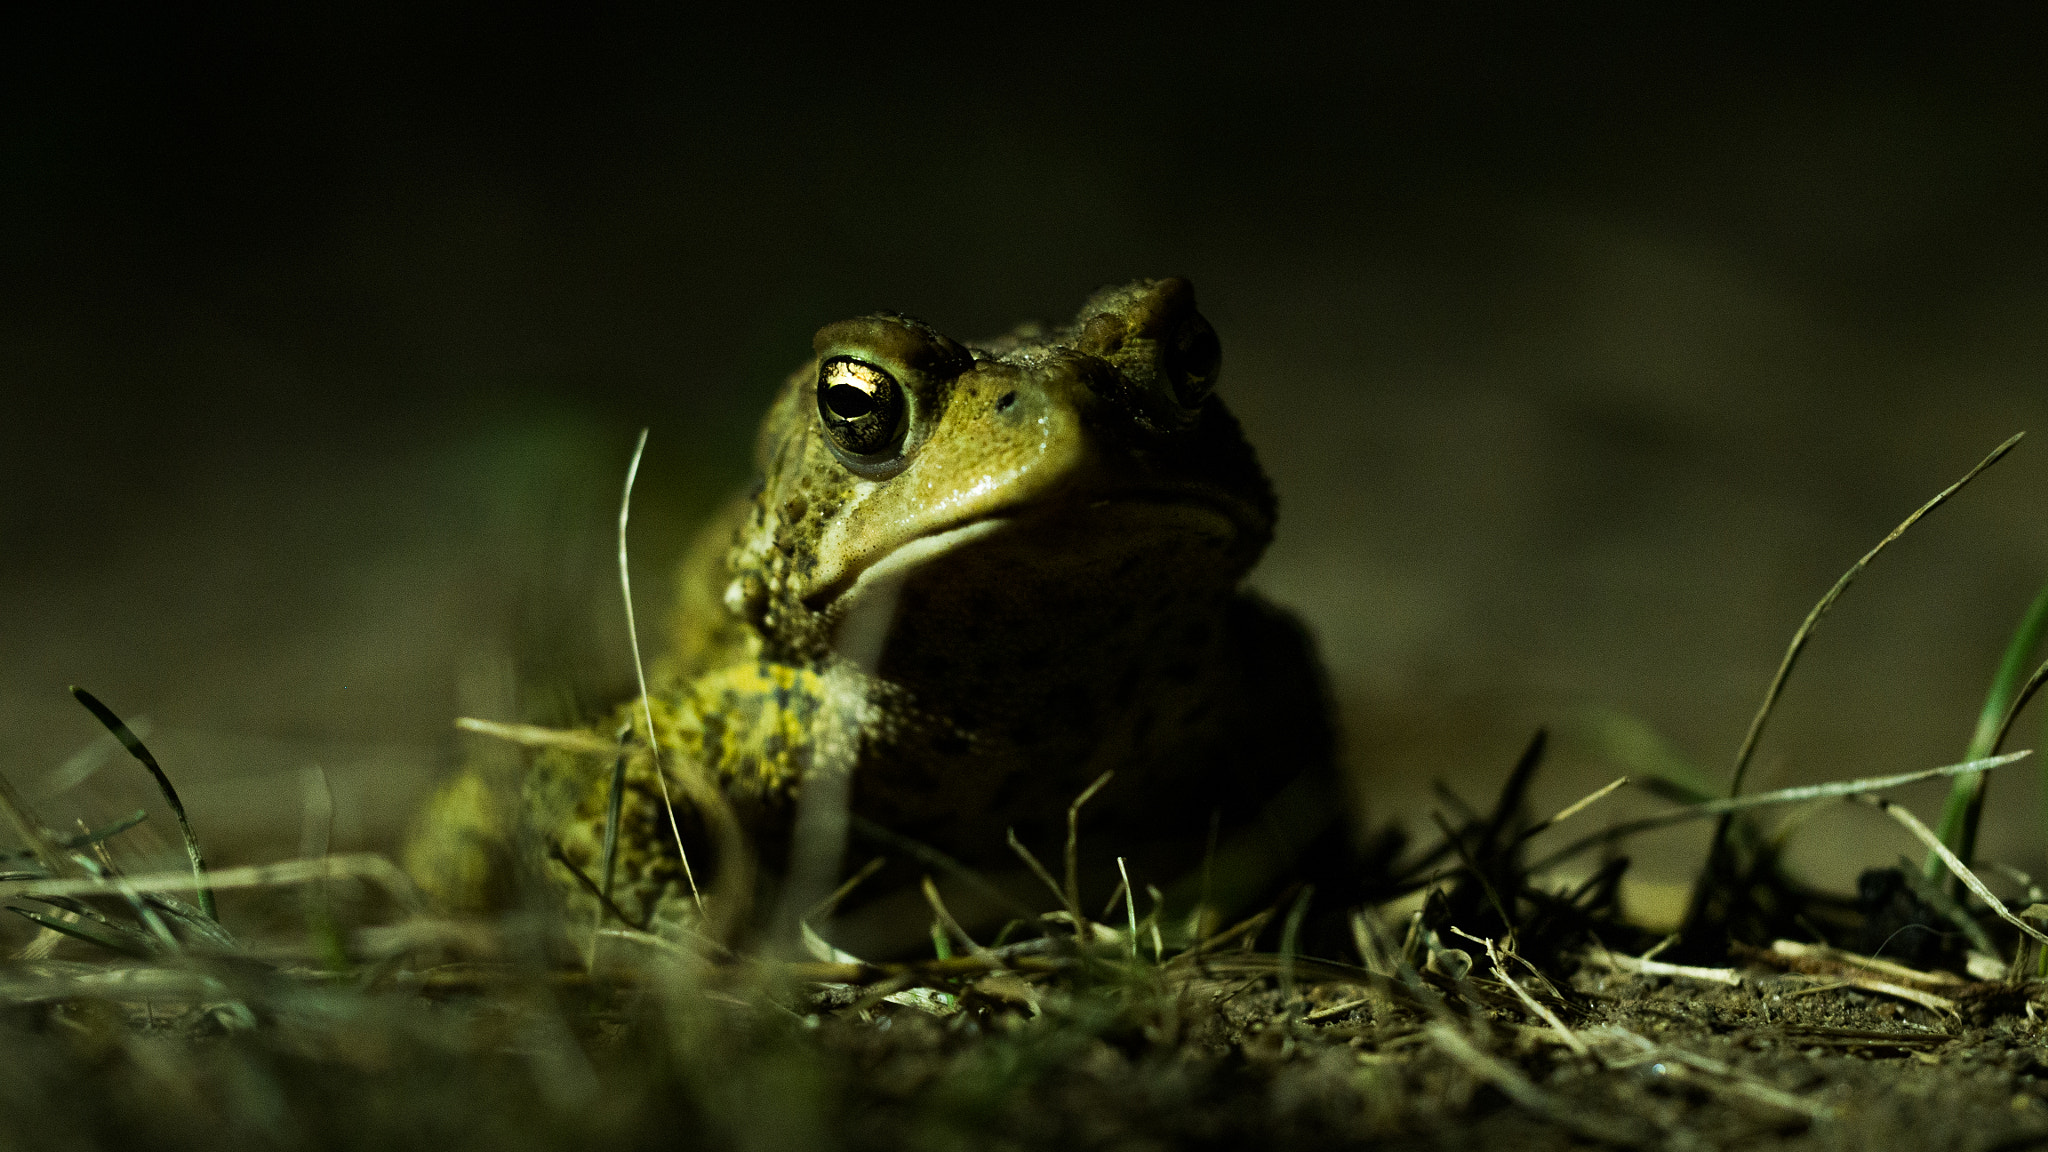 Olympus PEN E-PL5 sample photo. Dark side of the frog photography